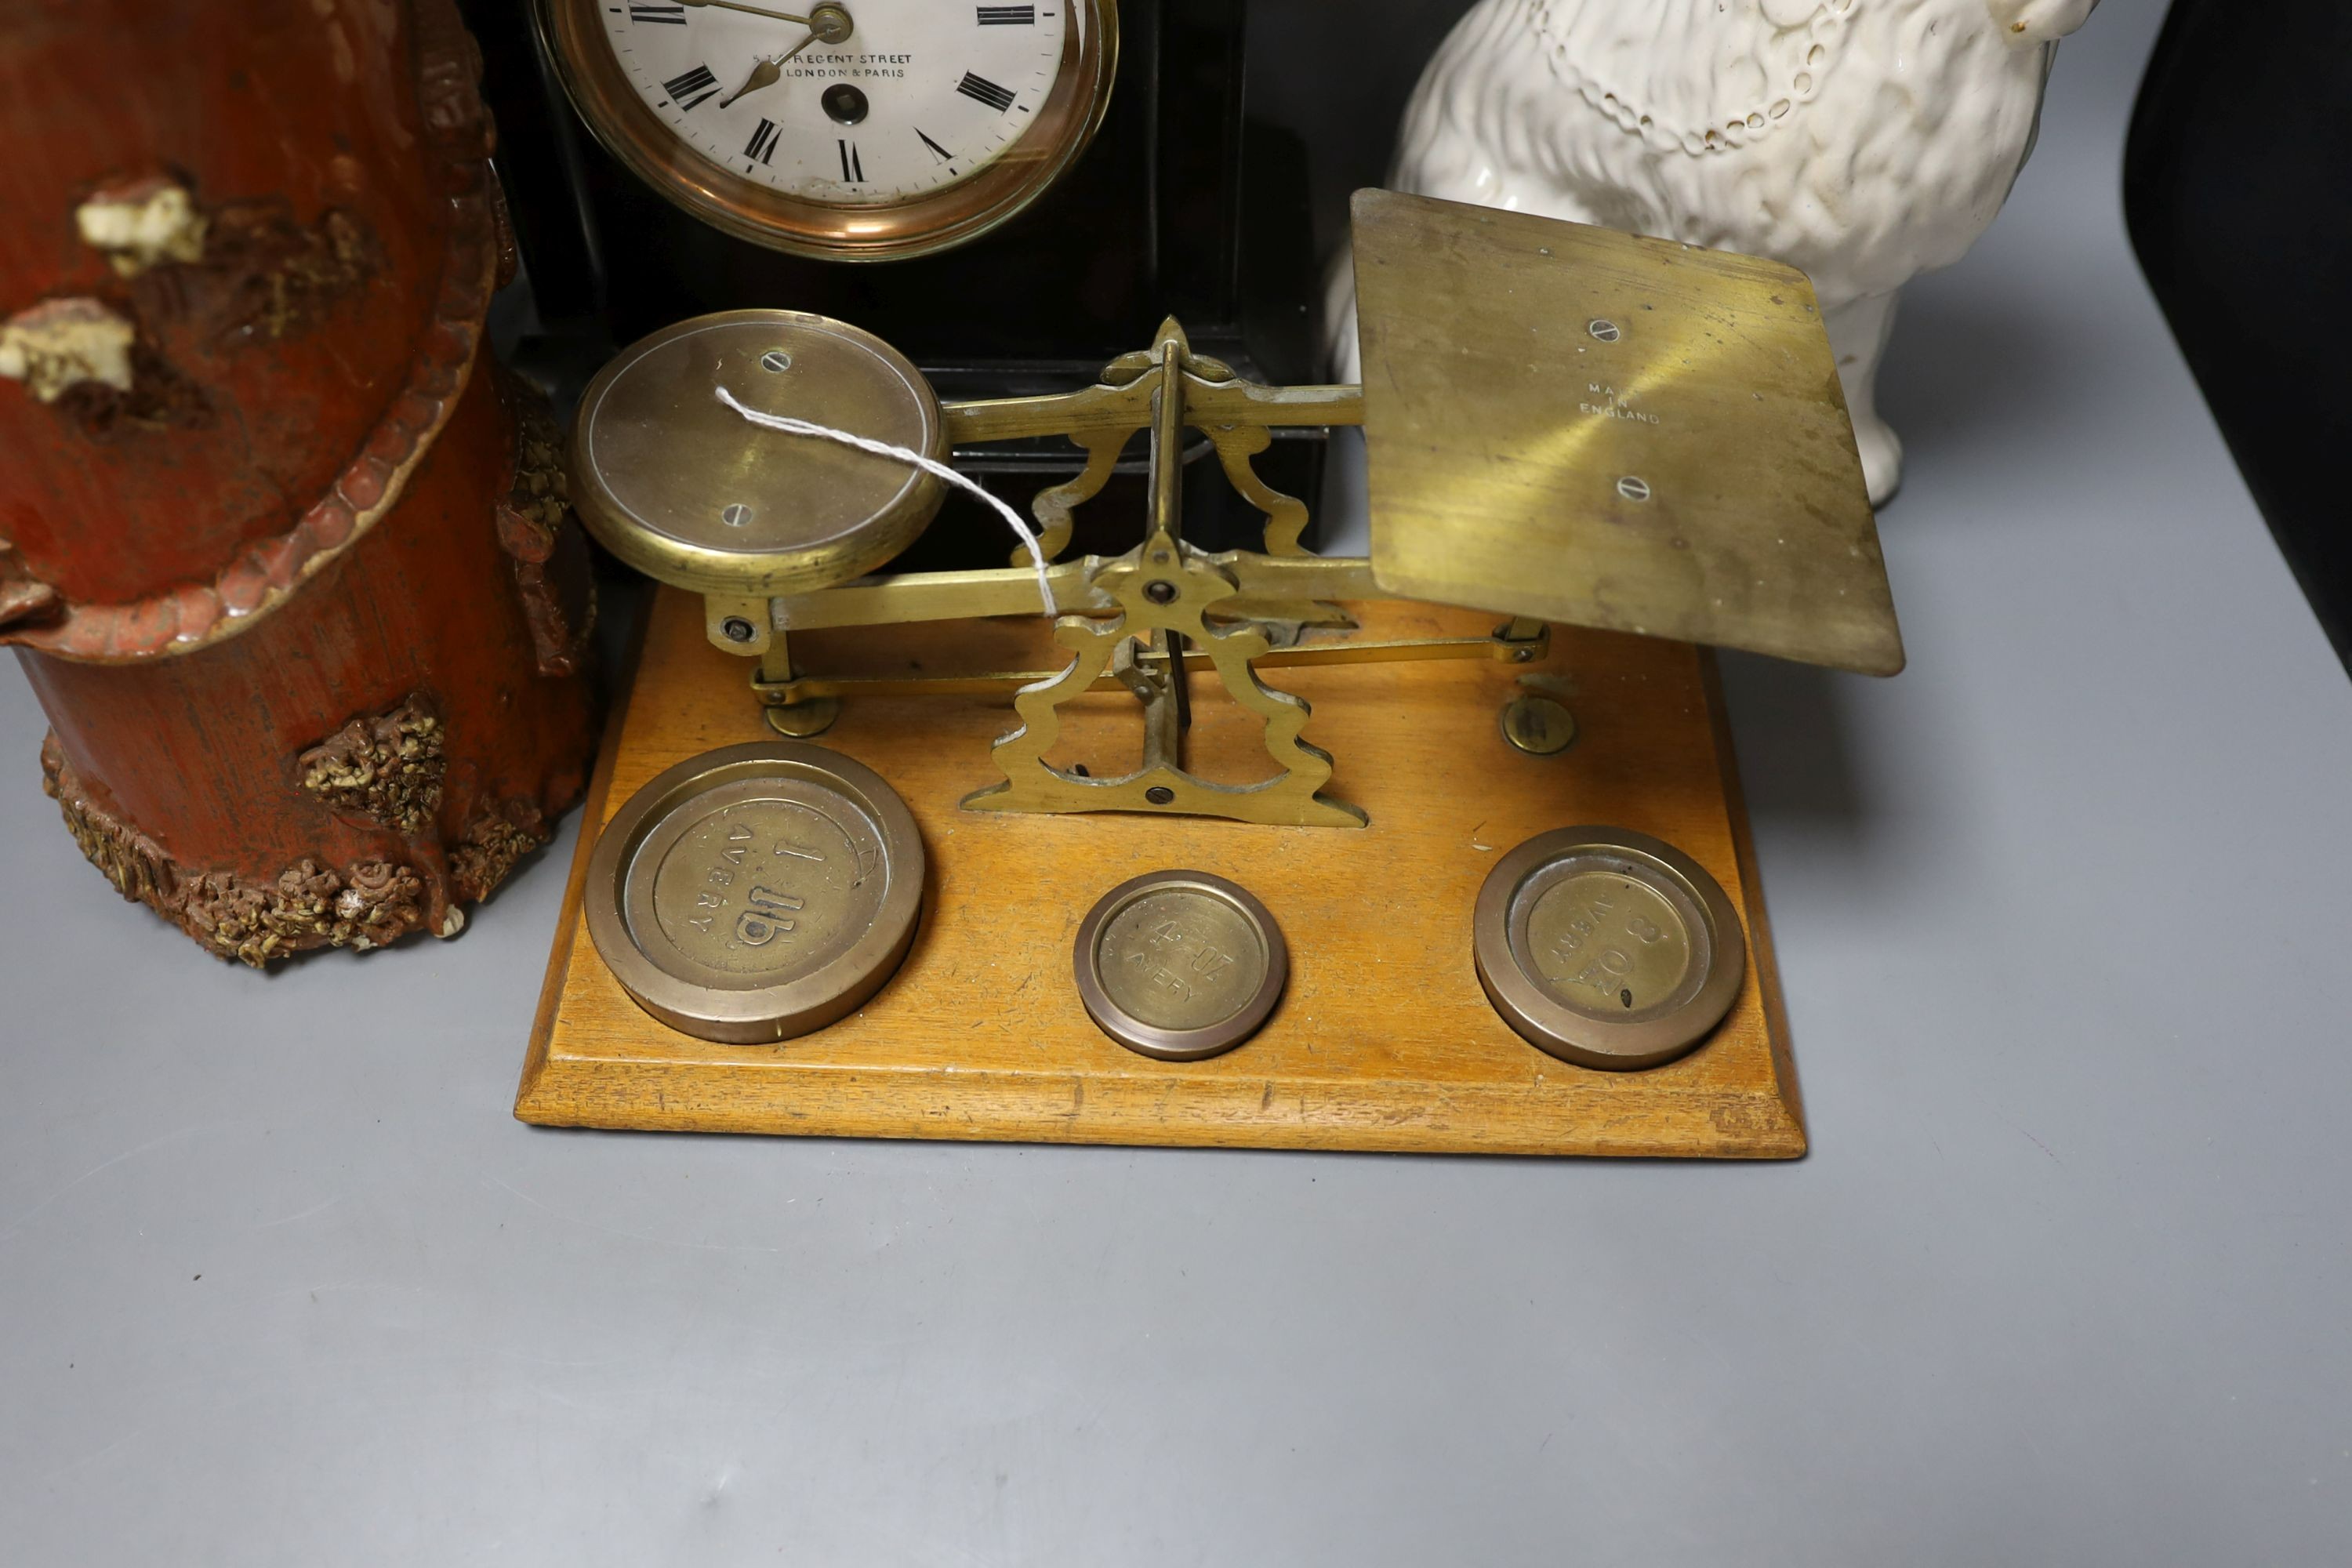 A pair of Staffordshire dogs, together with a pottery brush pot, Howell James mantle clock and other miscellaneous items including postal scales (7)